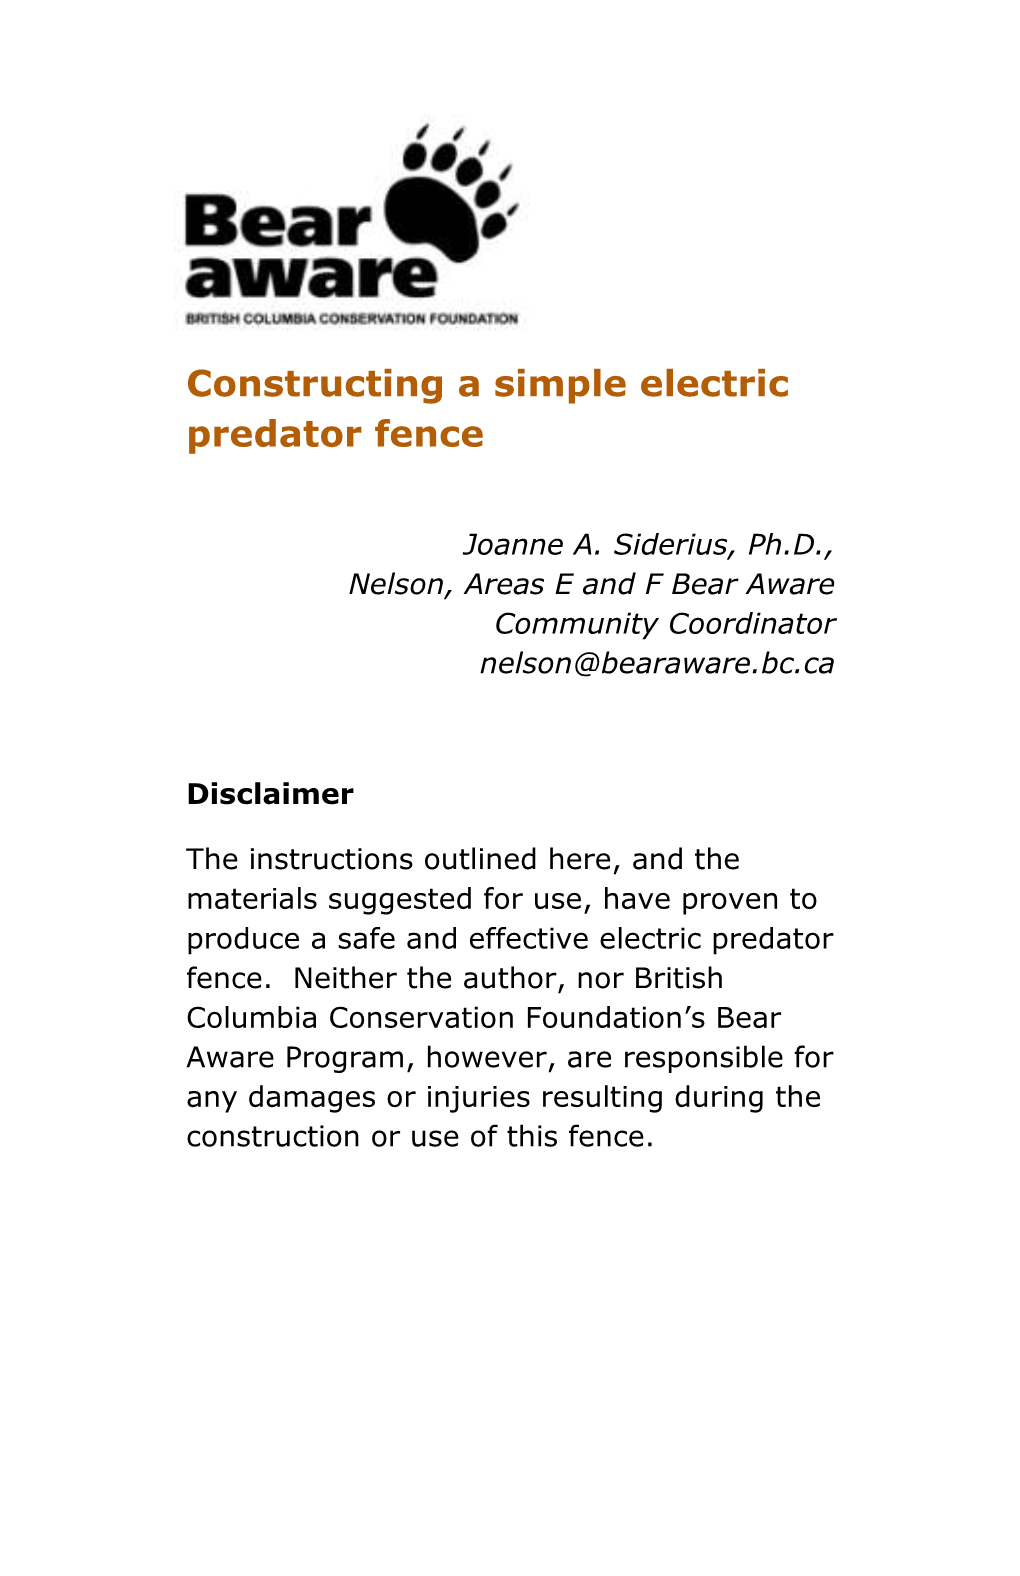 Constructing a Simple Electric Predator Fence